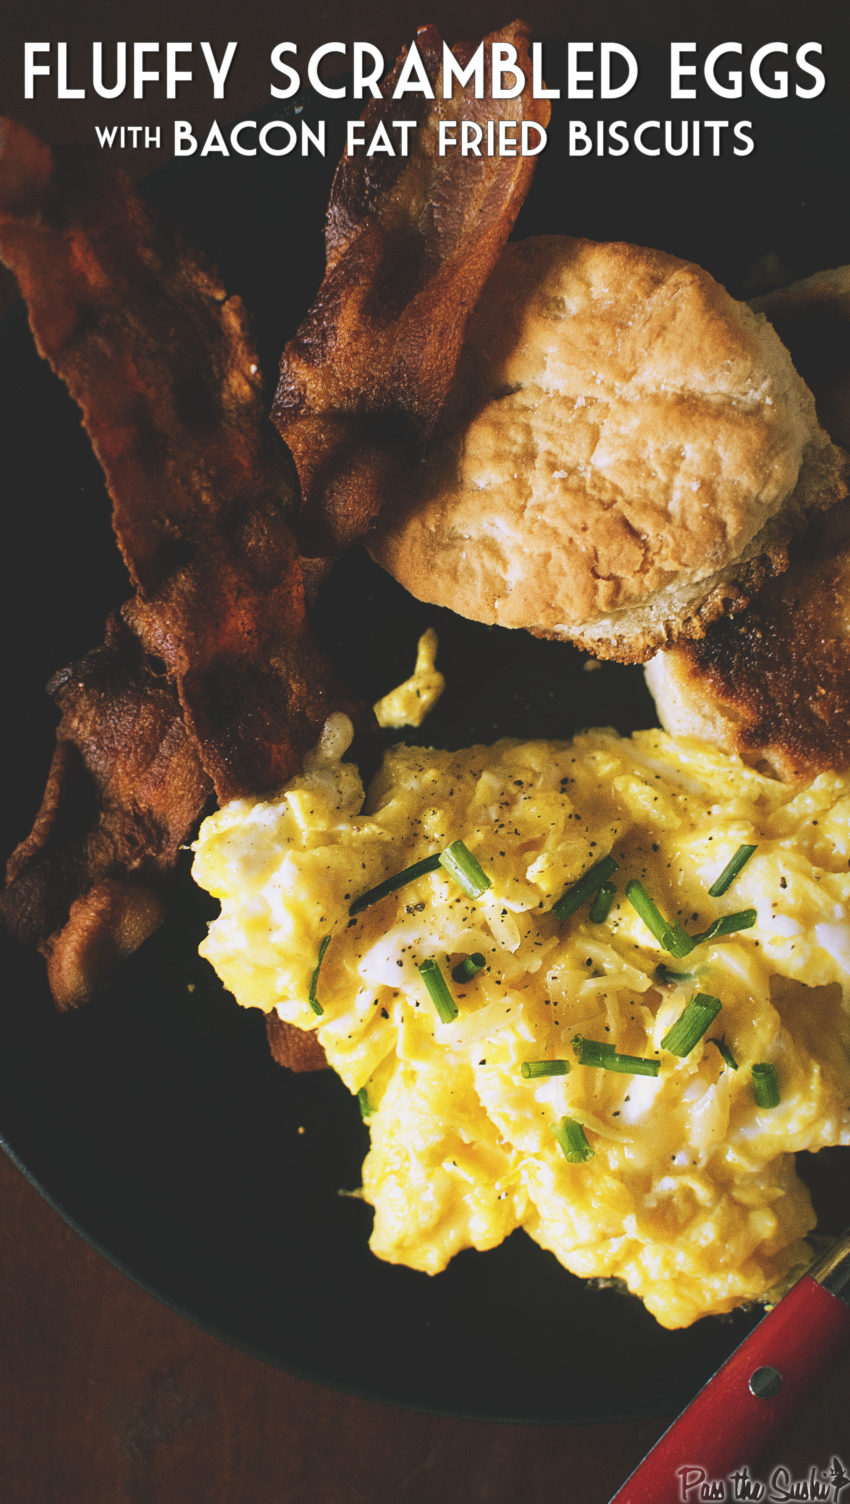 Perfectly Fluffy Scrambled Eggs with Bacon Fat Fried Biscuits | Kita Roberts GirlCarnivore.com